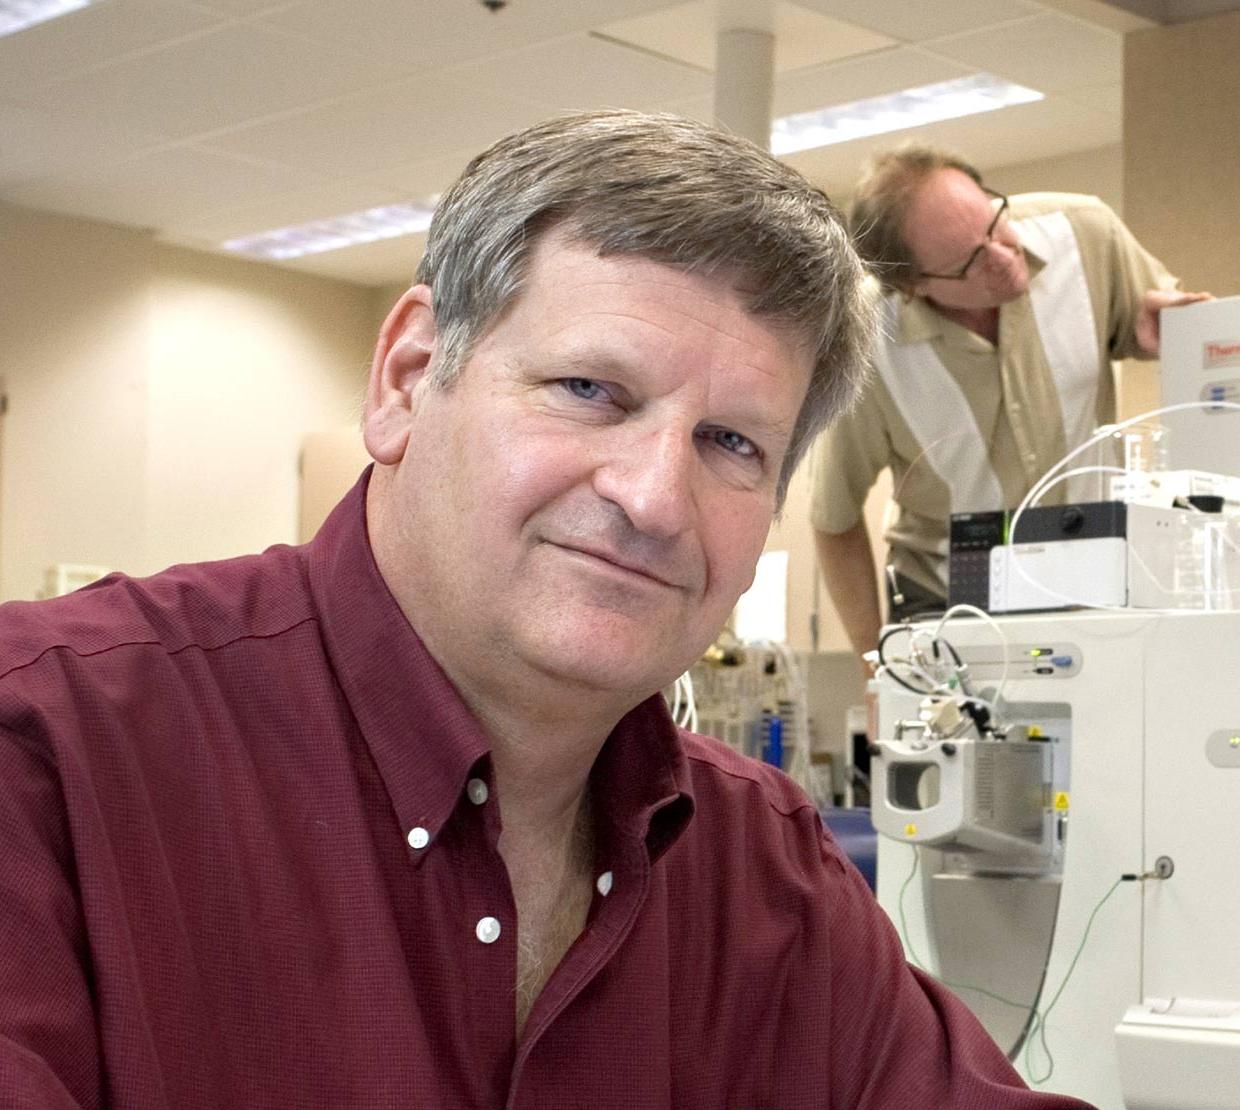 Joe Beckman in his lab with colleagues